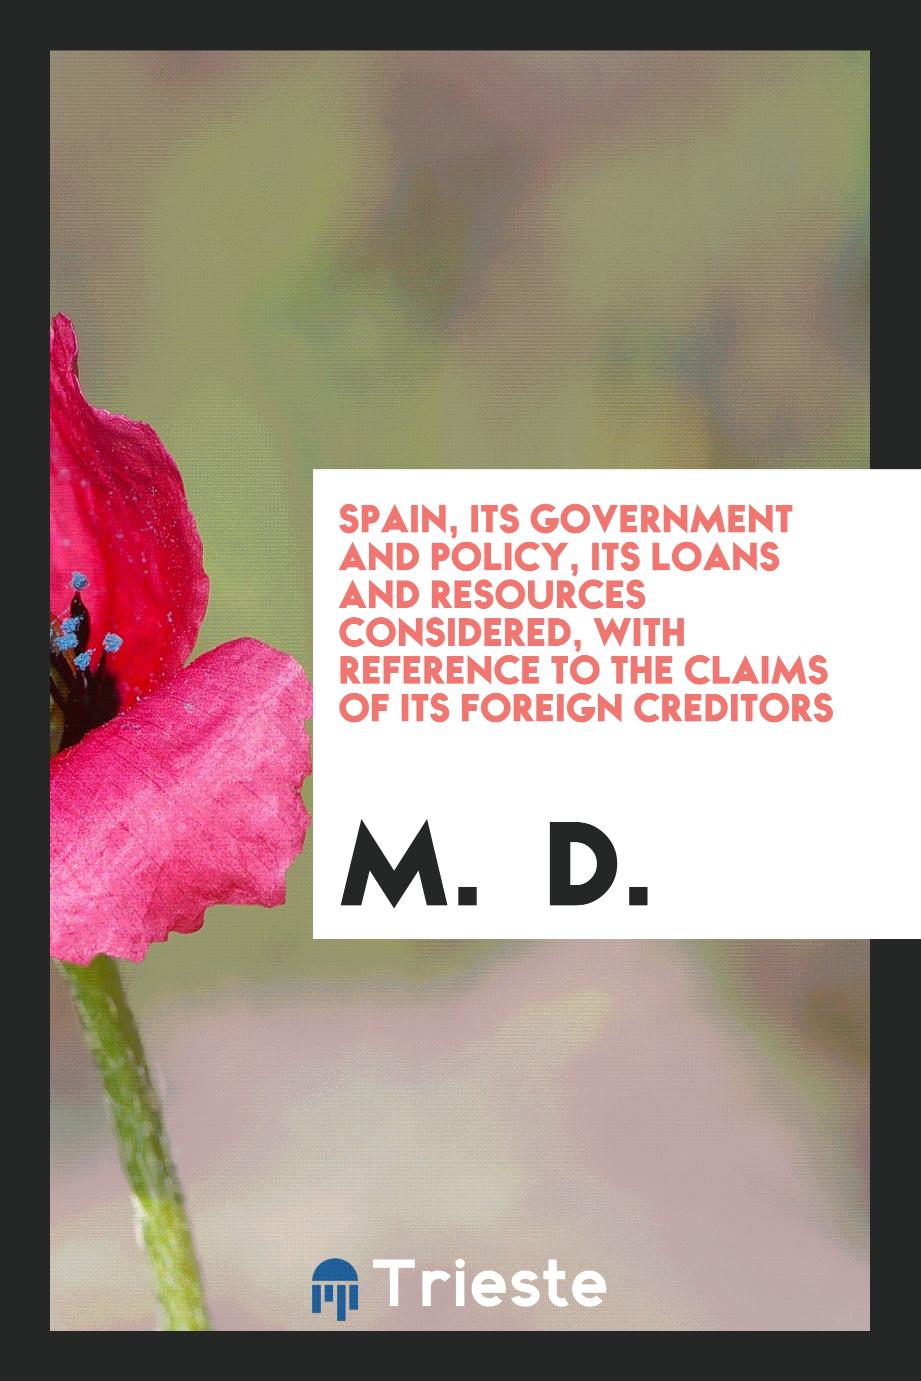 Spain, its government and policy, its loans and resources considered, with reference to the claims of its foreign creditors